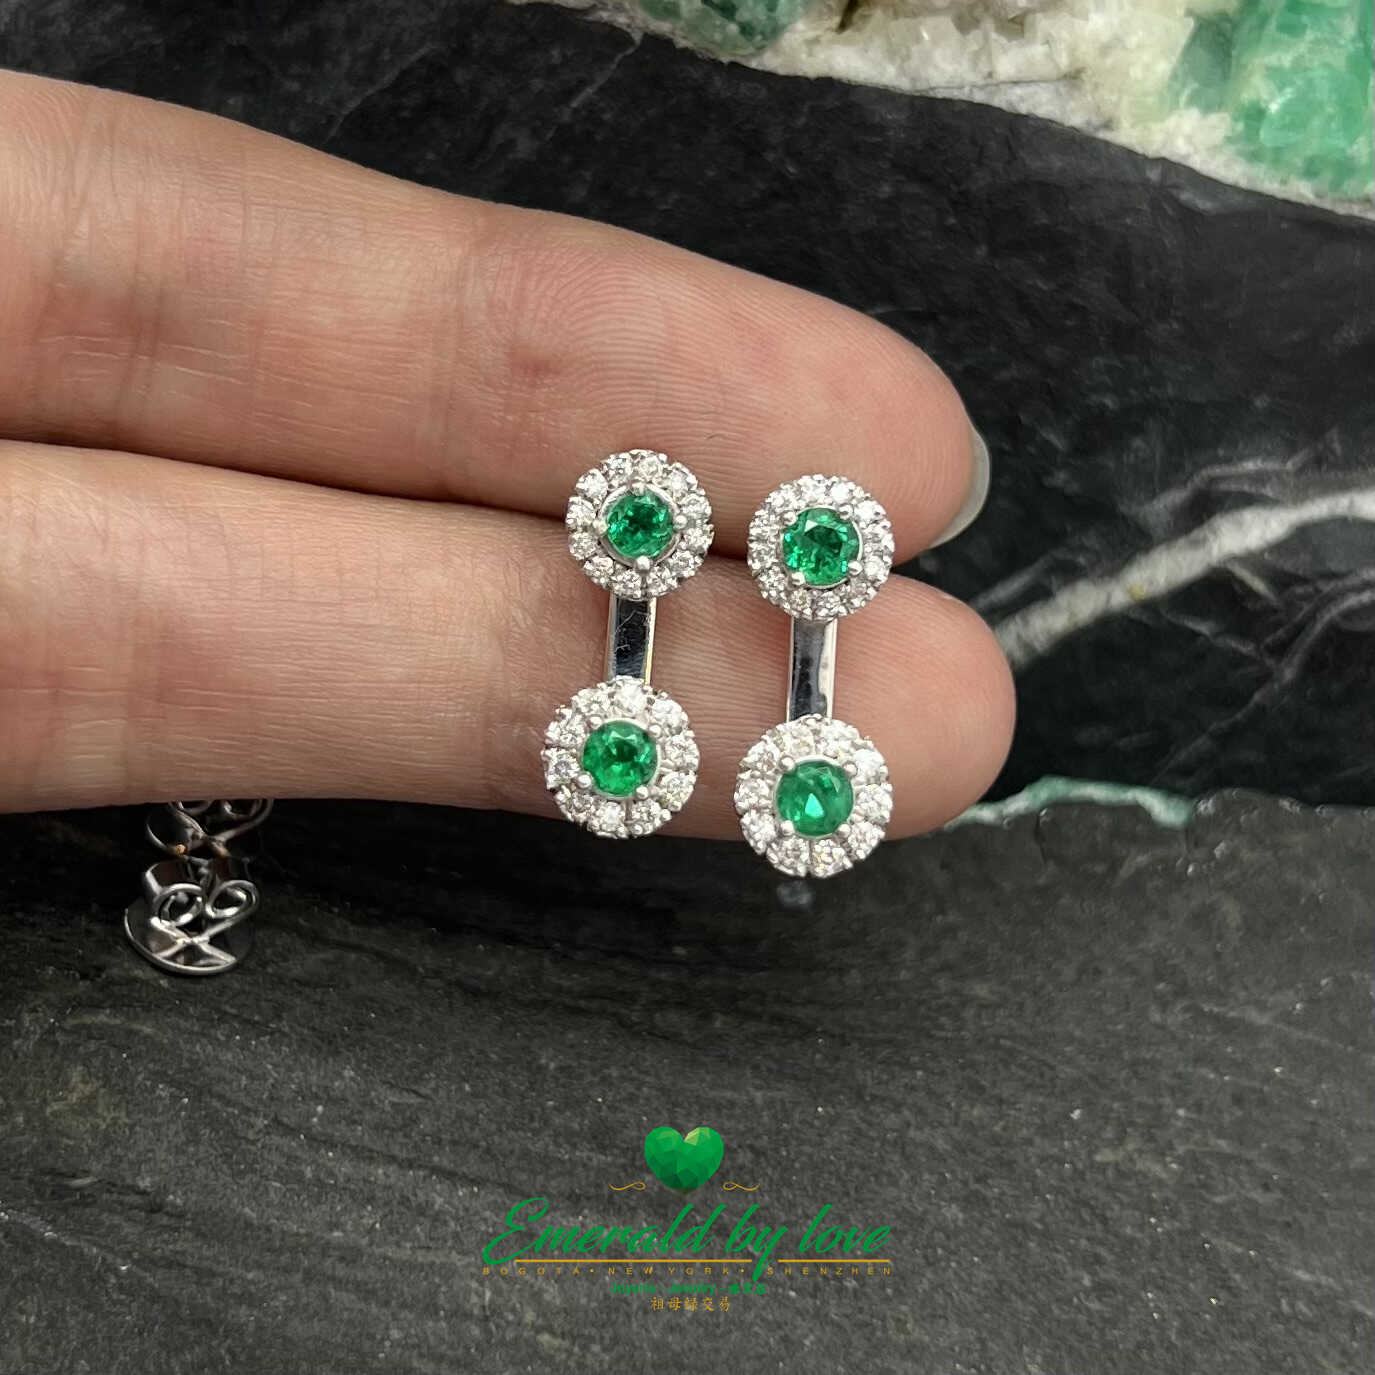 White Gold Earrings with Round Emeralds and Diamonds